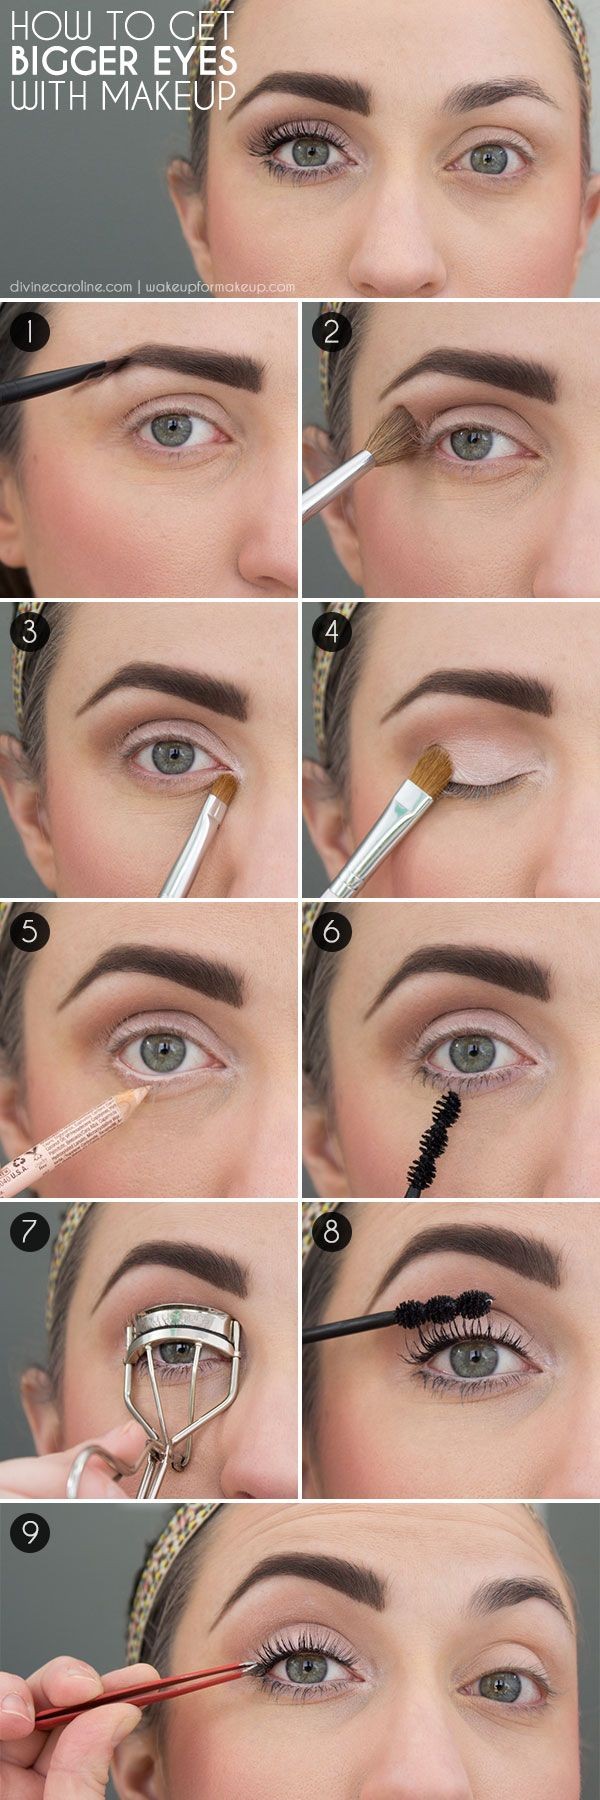 Check out beauty blogger Ivy's step-by-step guide...